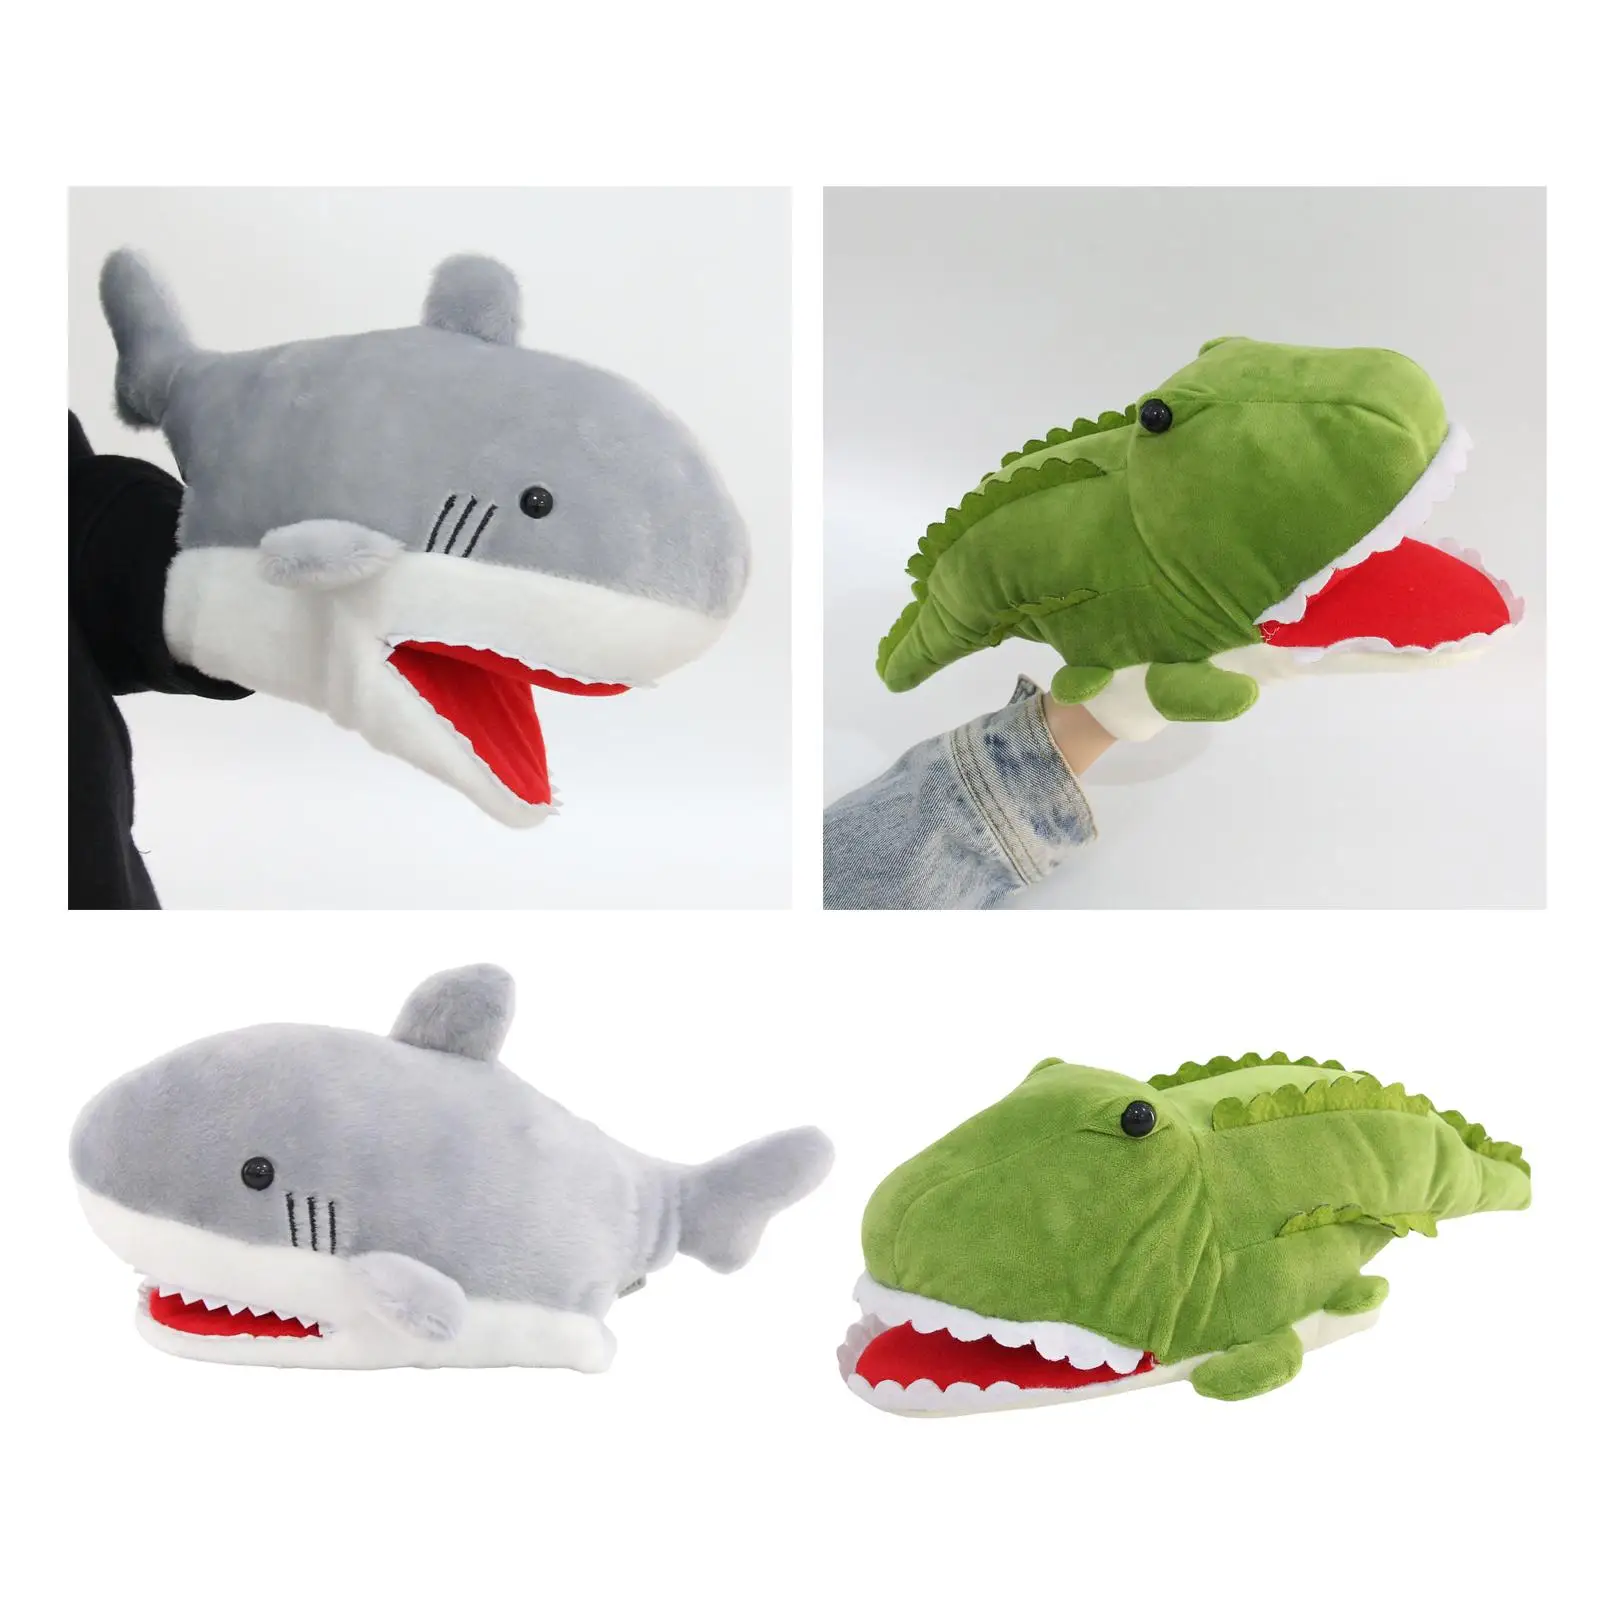 Animal Hand Puppets Kids Toys Gift Model Figure Toy Stuffed Animal Toy for Teaching Imaginative